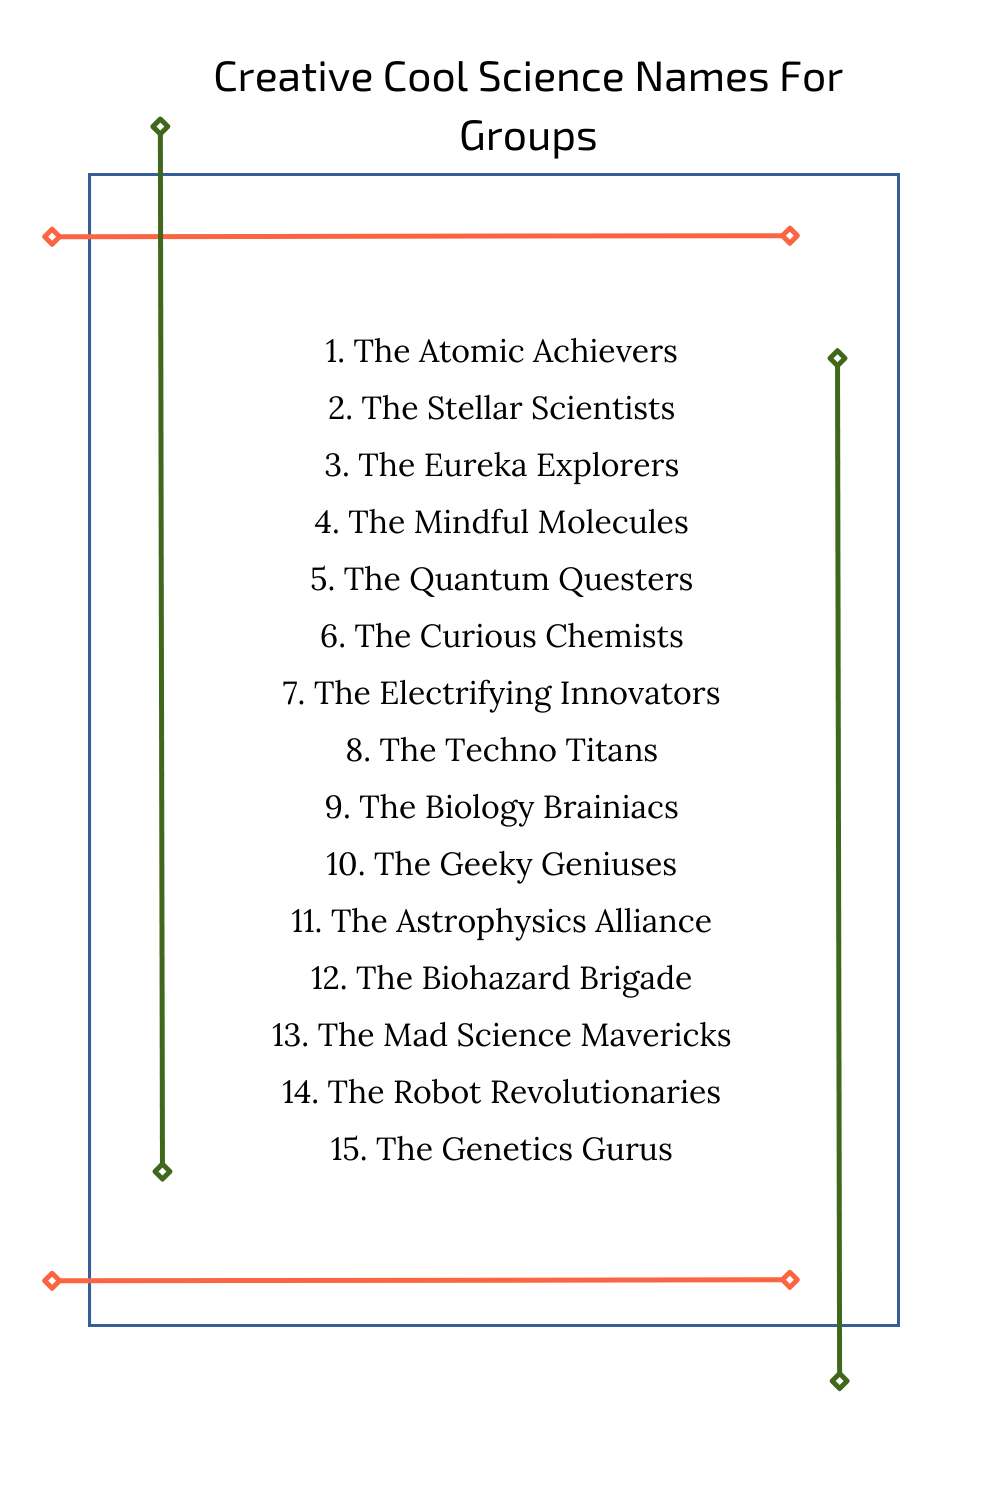 Creative Cool Science Names For Groups